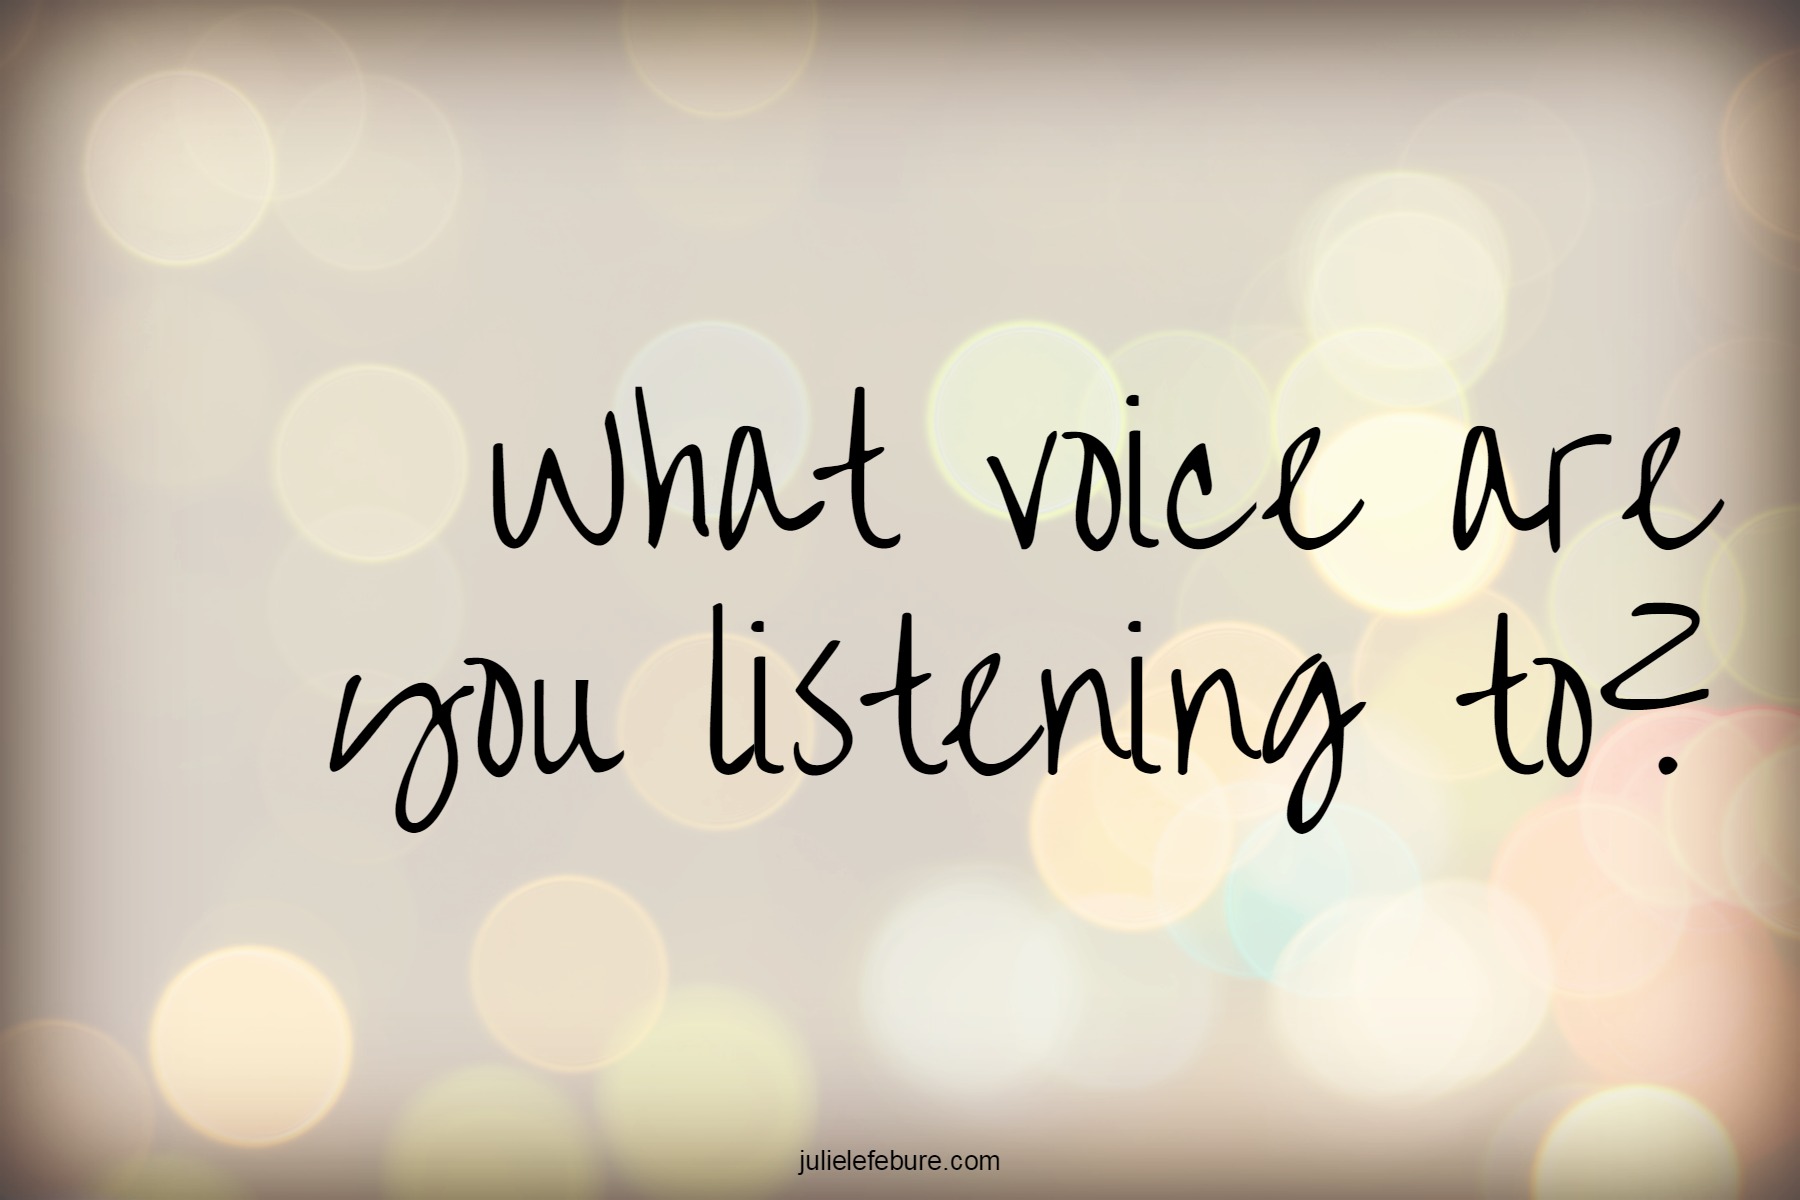 What Voice Are You Listening To?